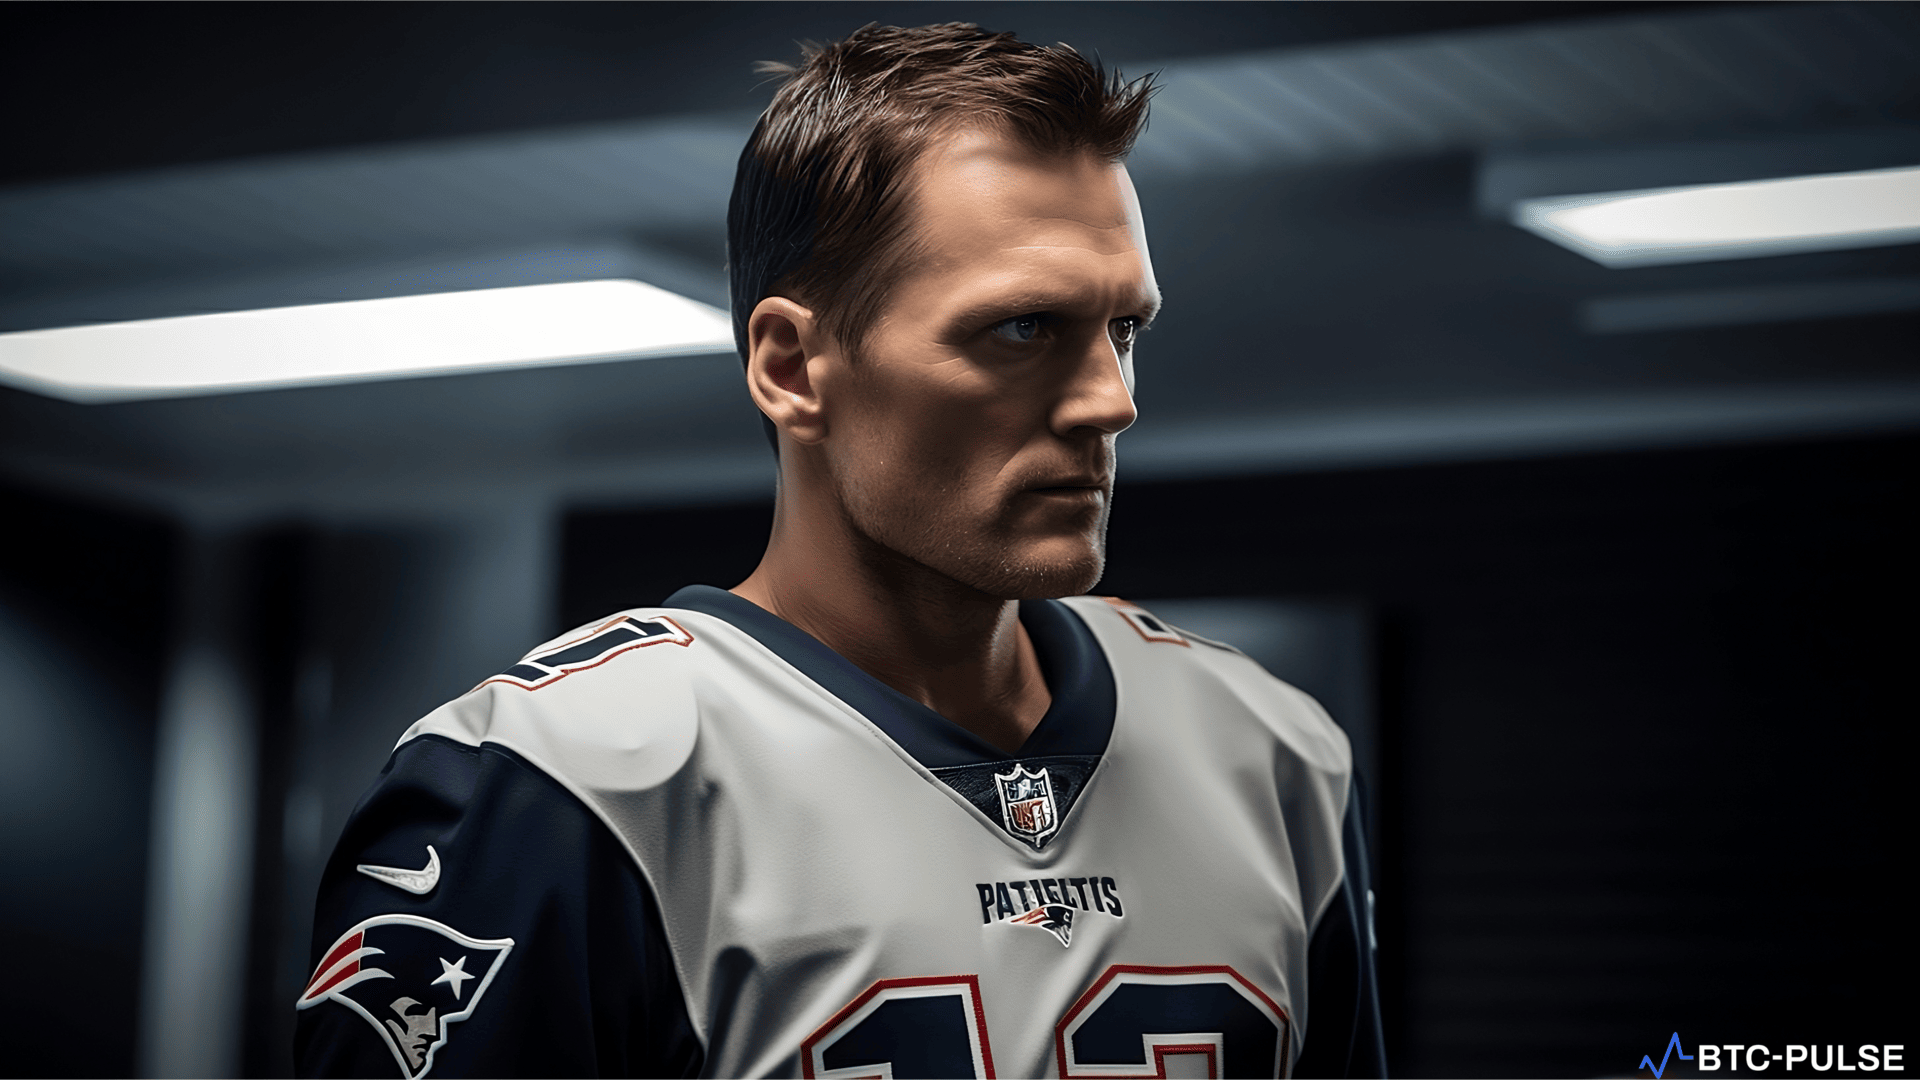 Tom Brady looking contemplative as he faces major financial loss from FTX's bankruptcy.